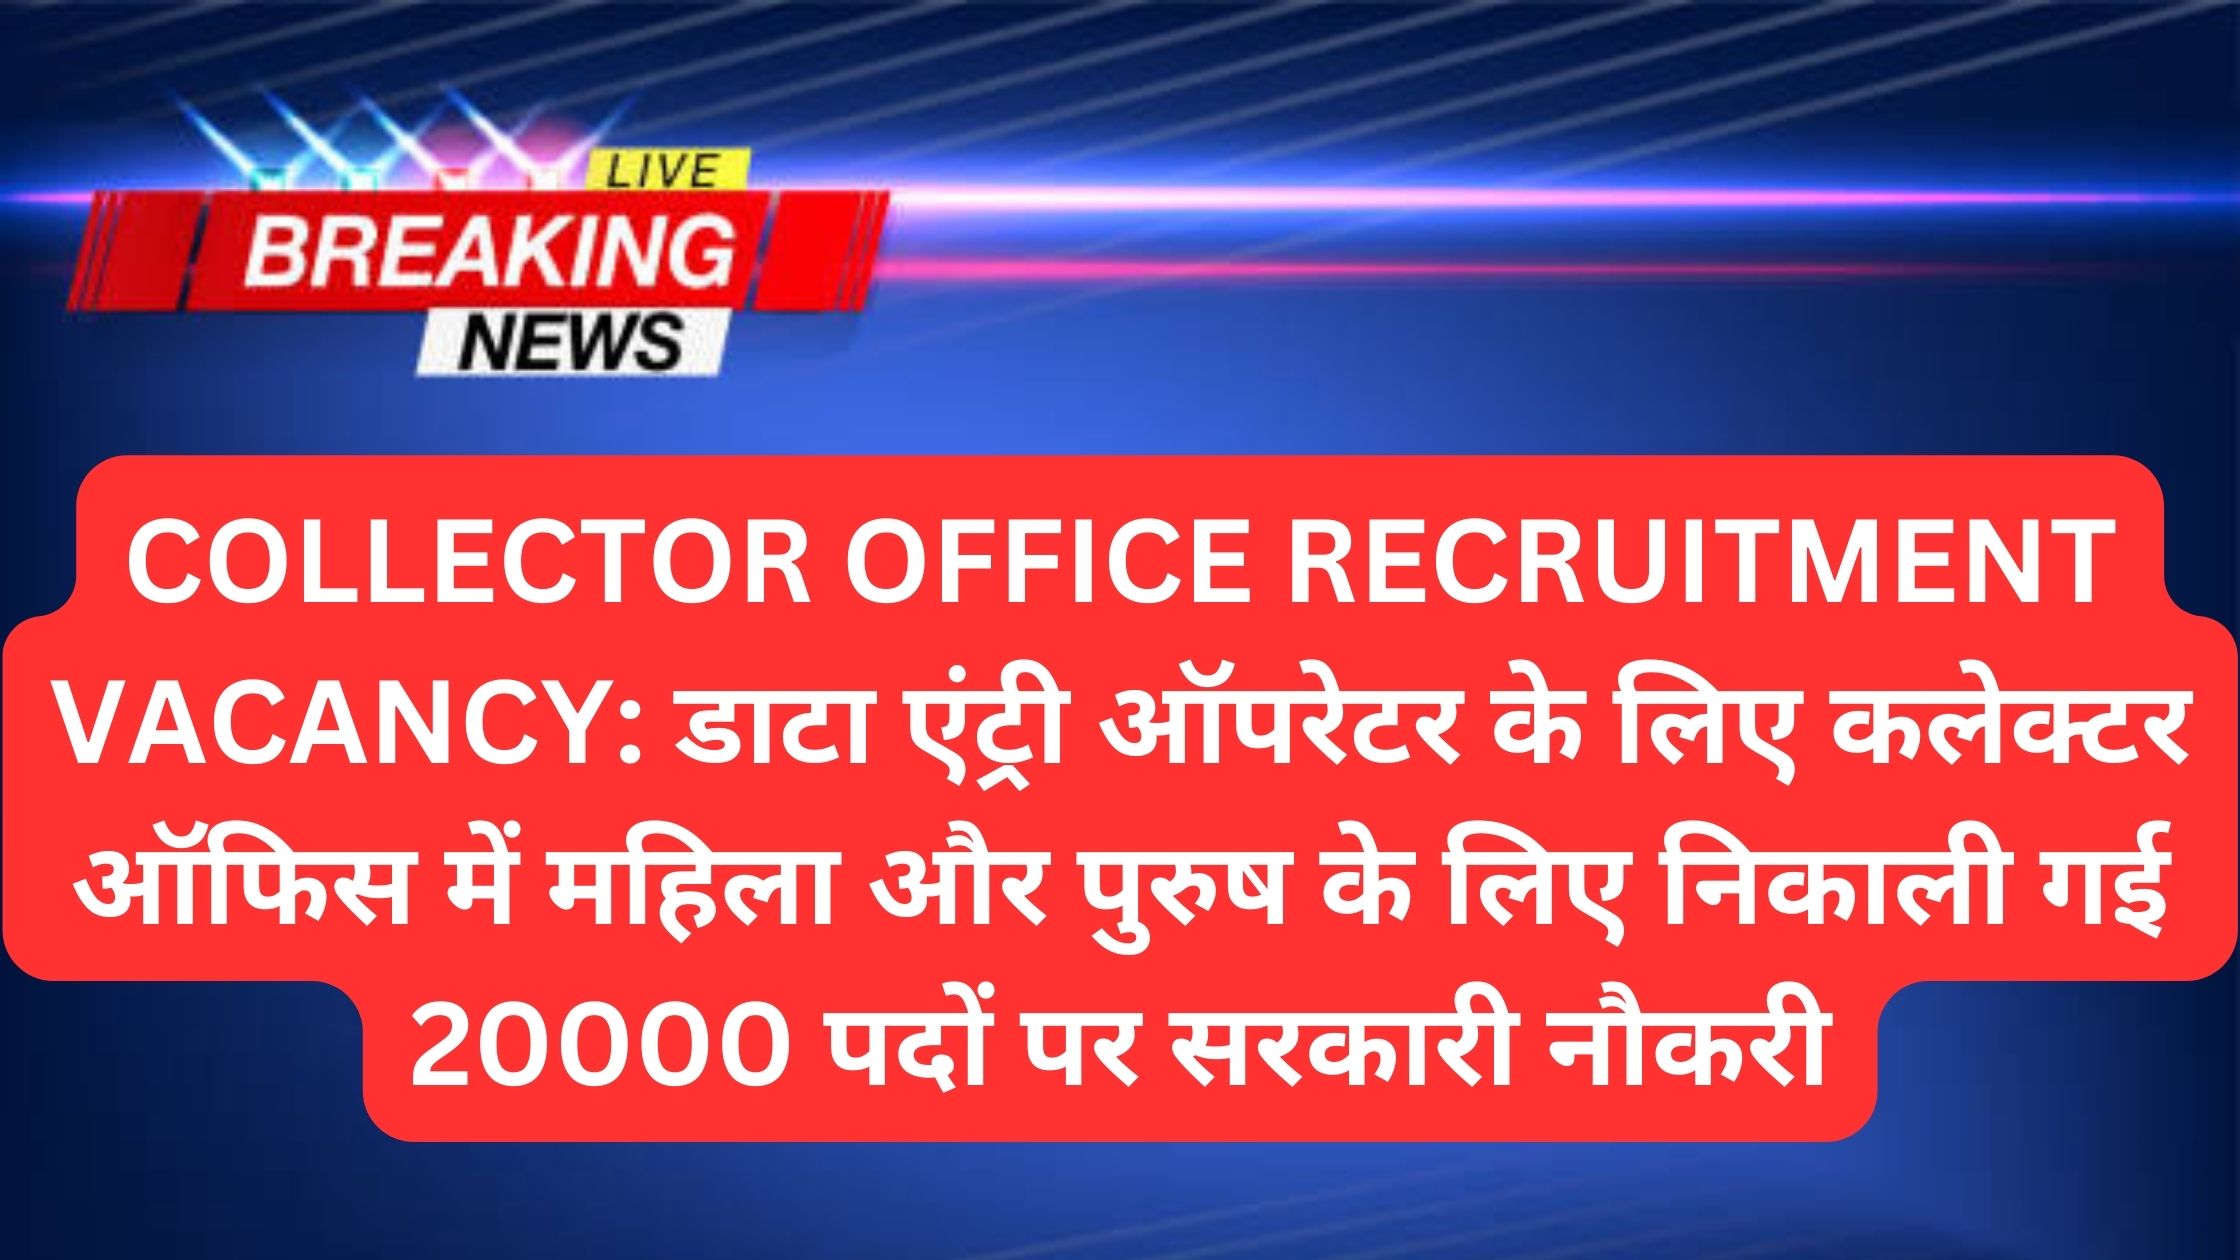 COLLECTOR OFFICE RECRUITMENT VACANCY